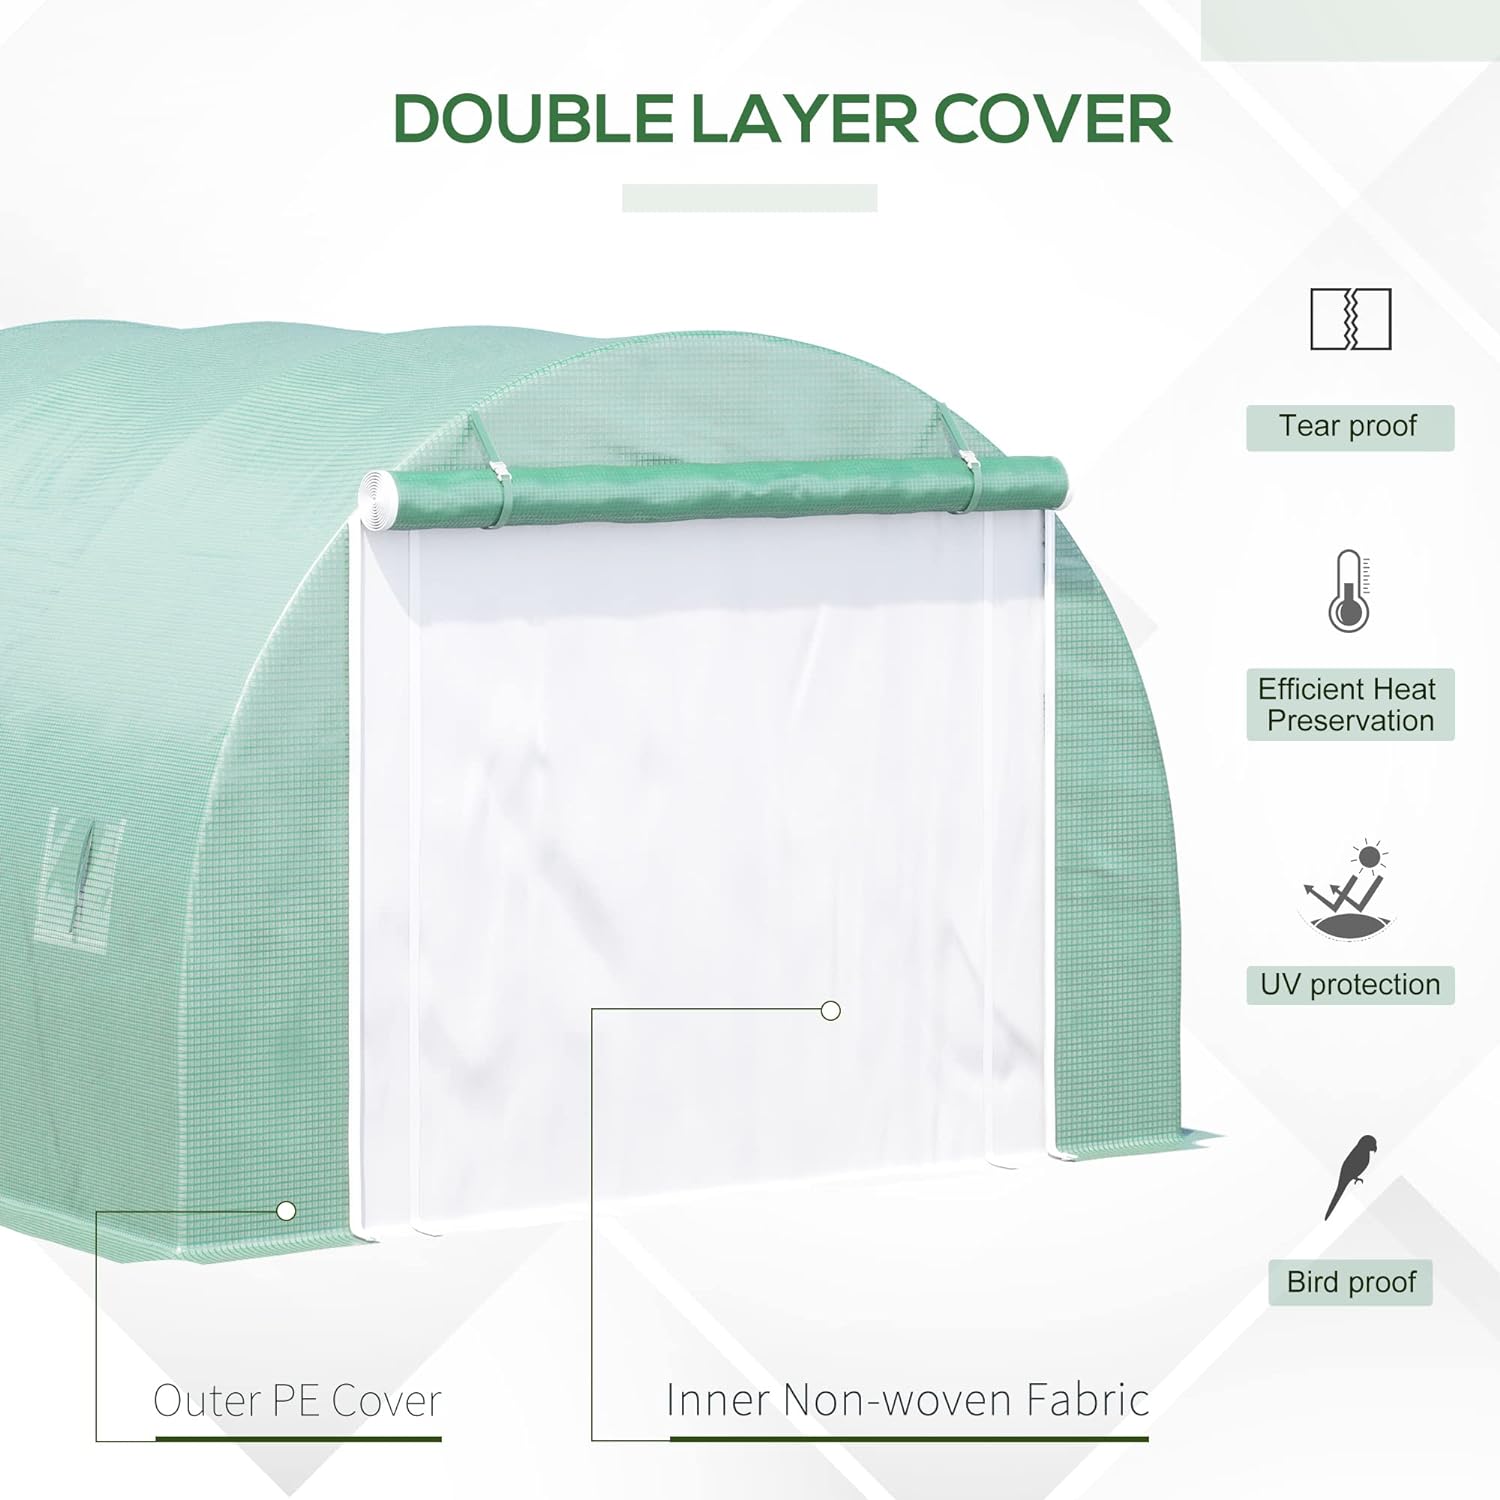 Outsunny 9.7 x 9.7 x 6.5 Large Walk-in Double Cover Polytunnel Greenhouse Outdoor w/ Roll-Up Zipper Doors and Windows Grow Plants, Seedlings, Herbs, or Flowers in Any Season-Gardening